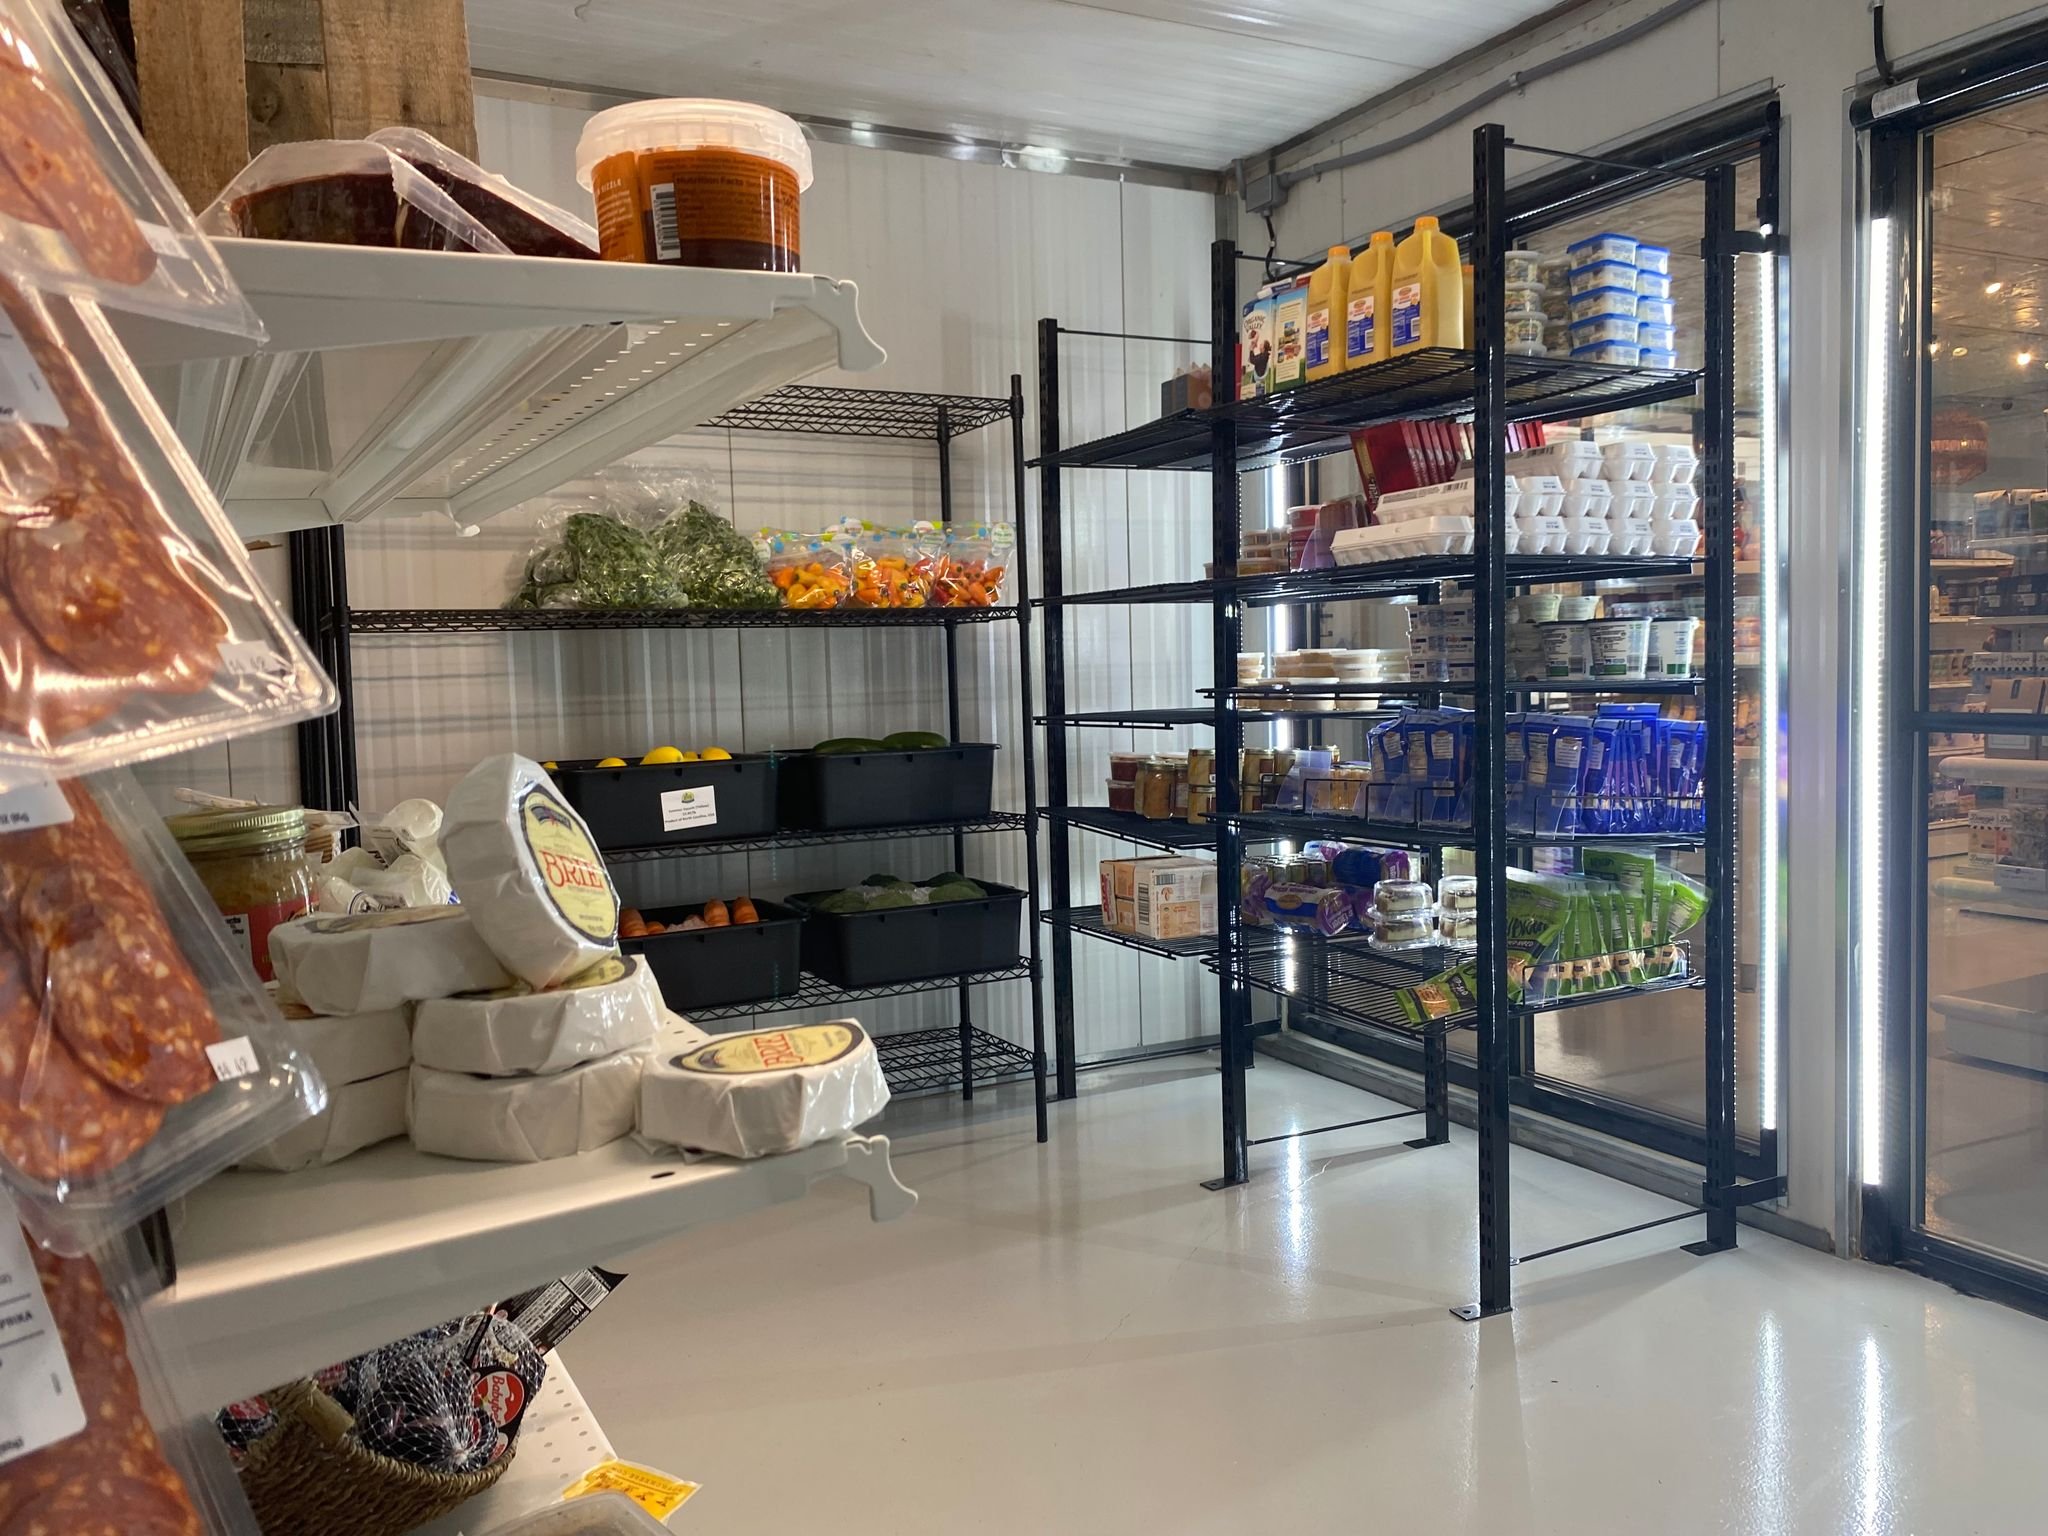 Walk-in fridge with produce, cheeses, craft beer, and more